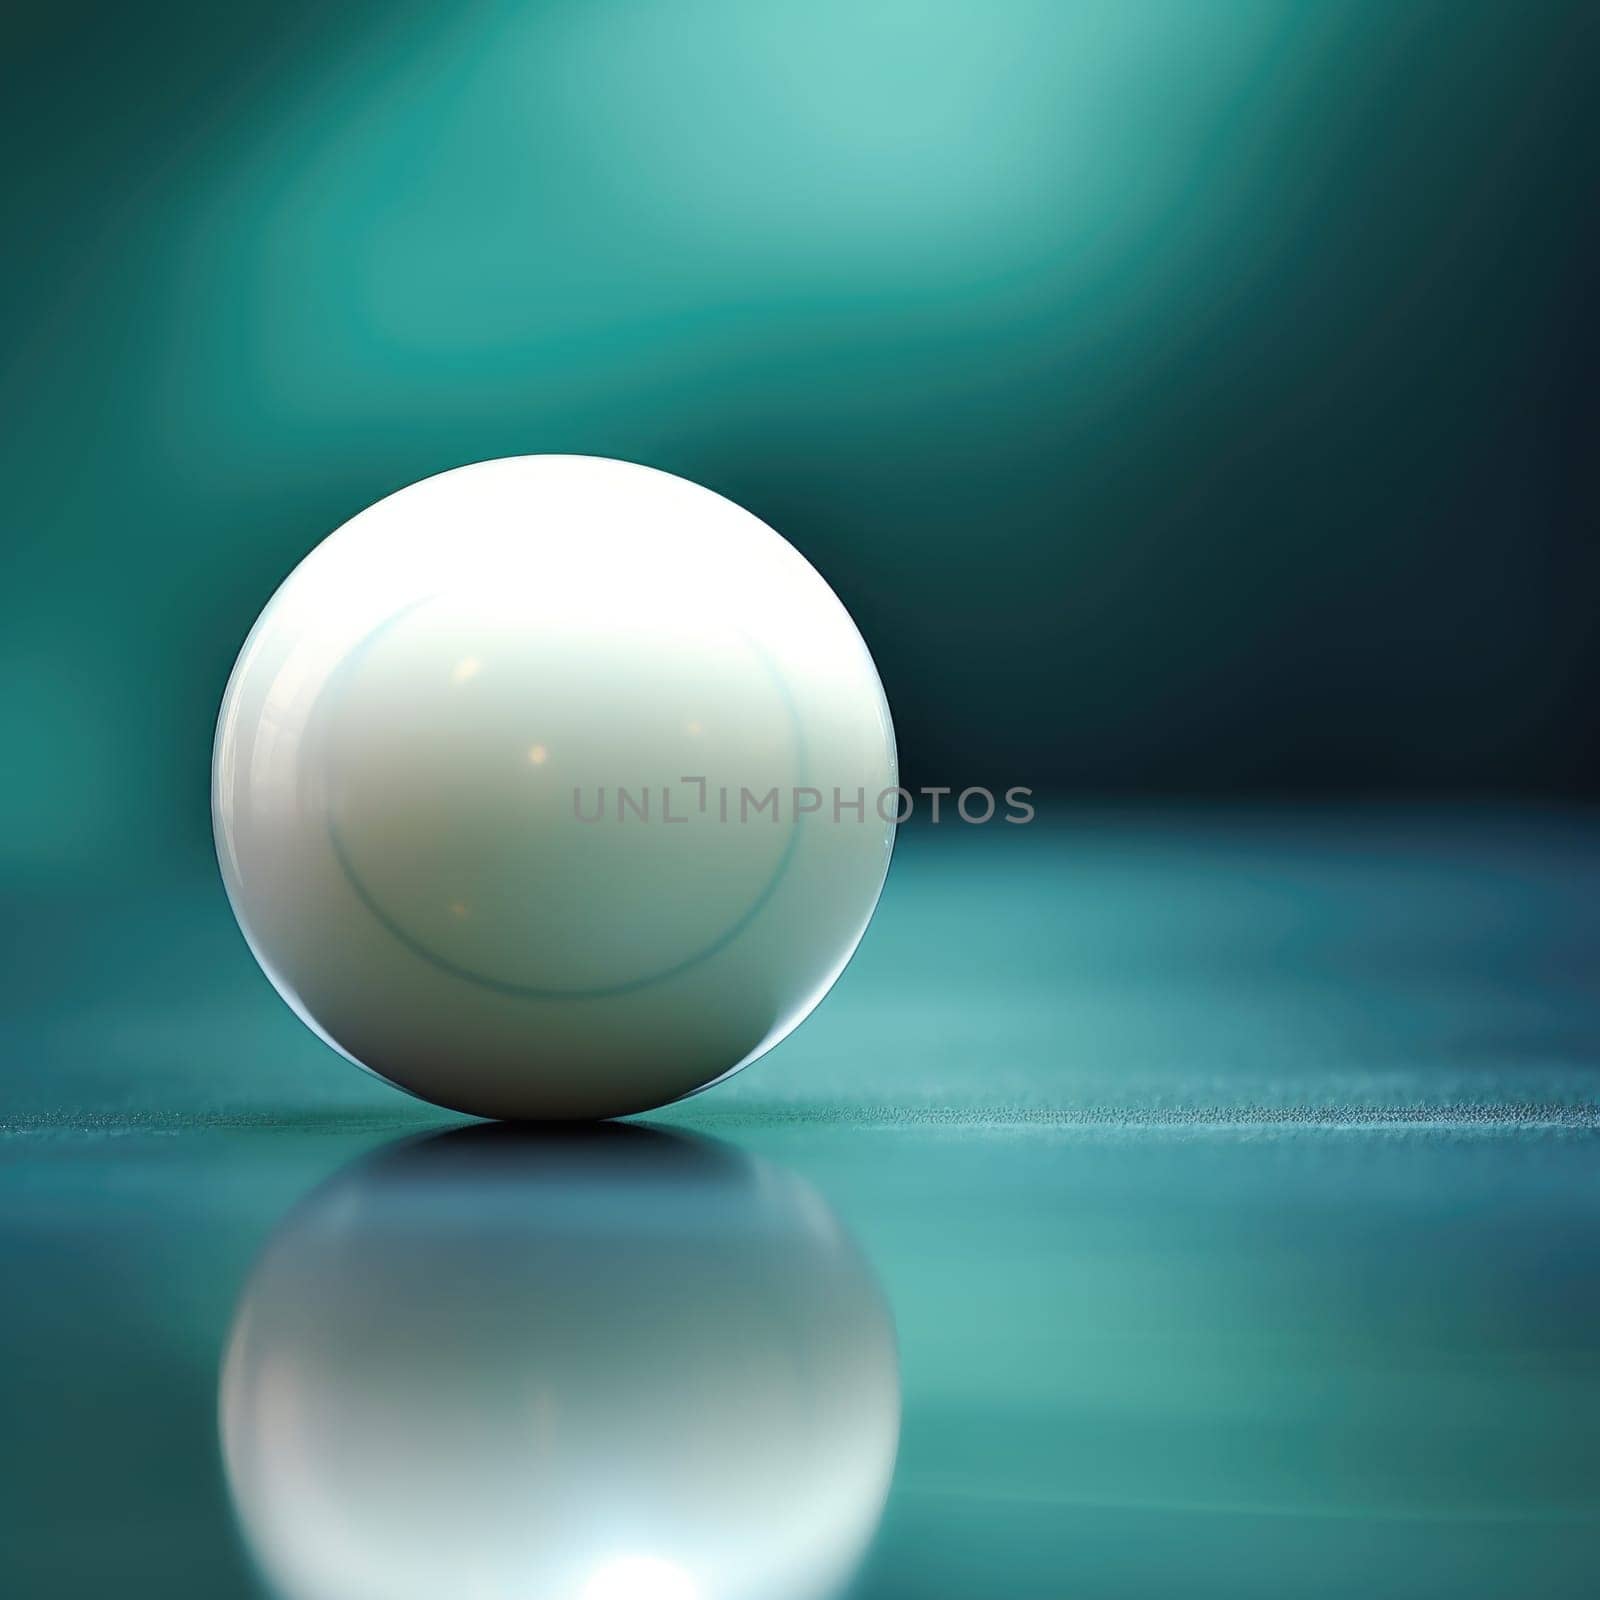 A white ball on a table with a blue background